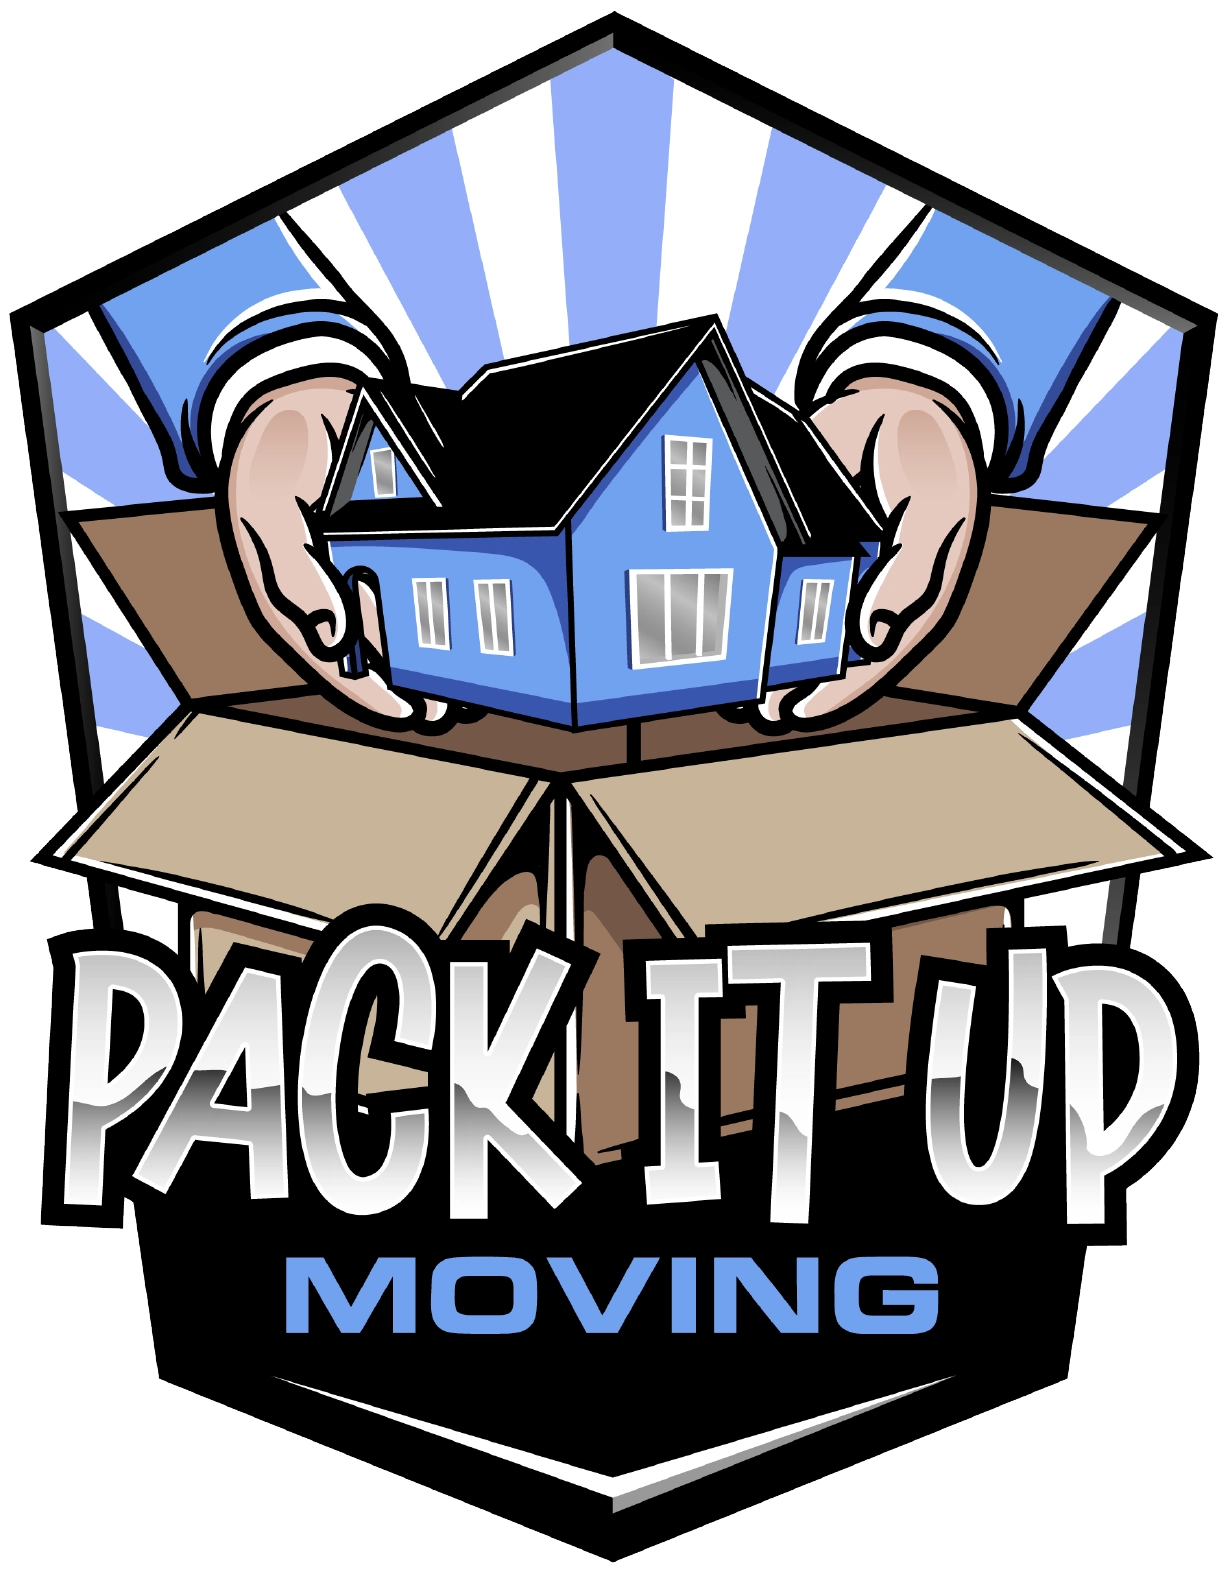 Pack It Up Moving Logo